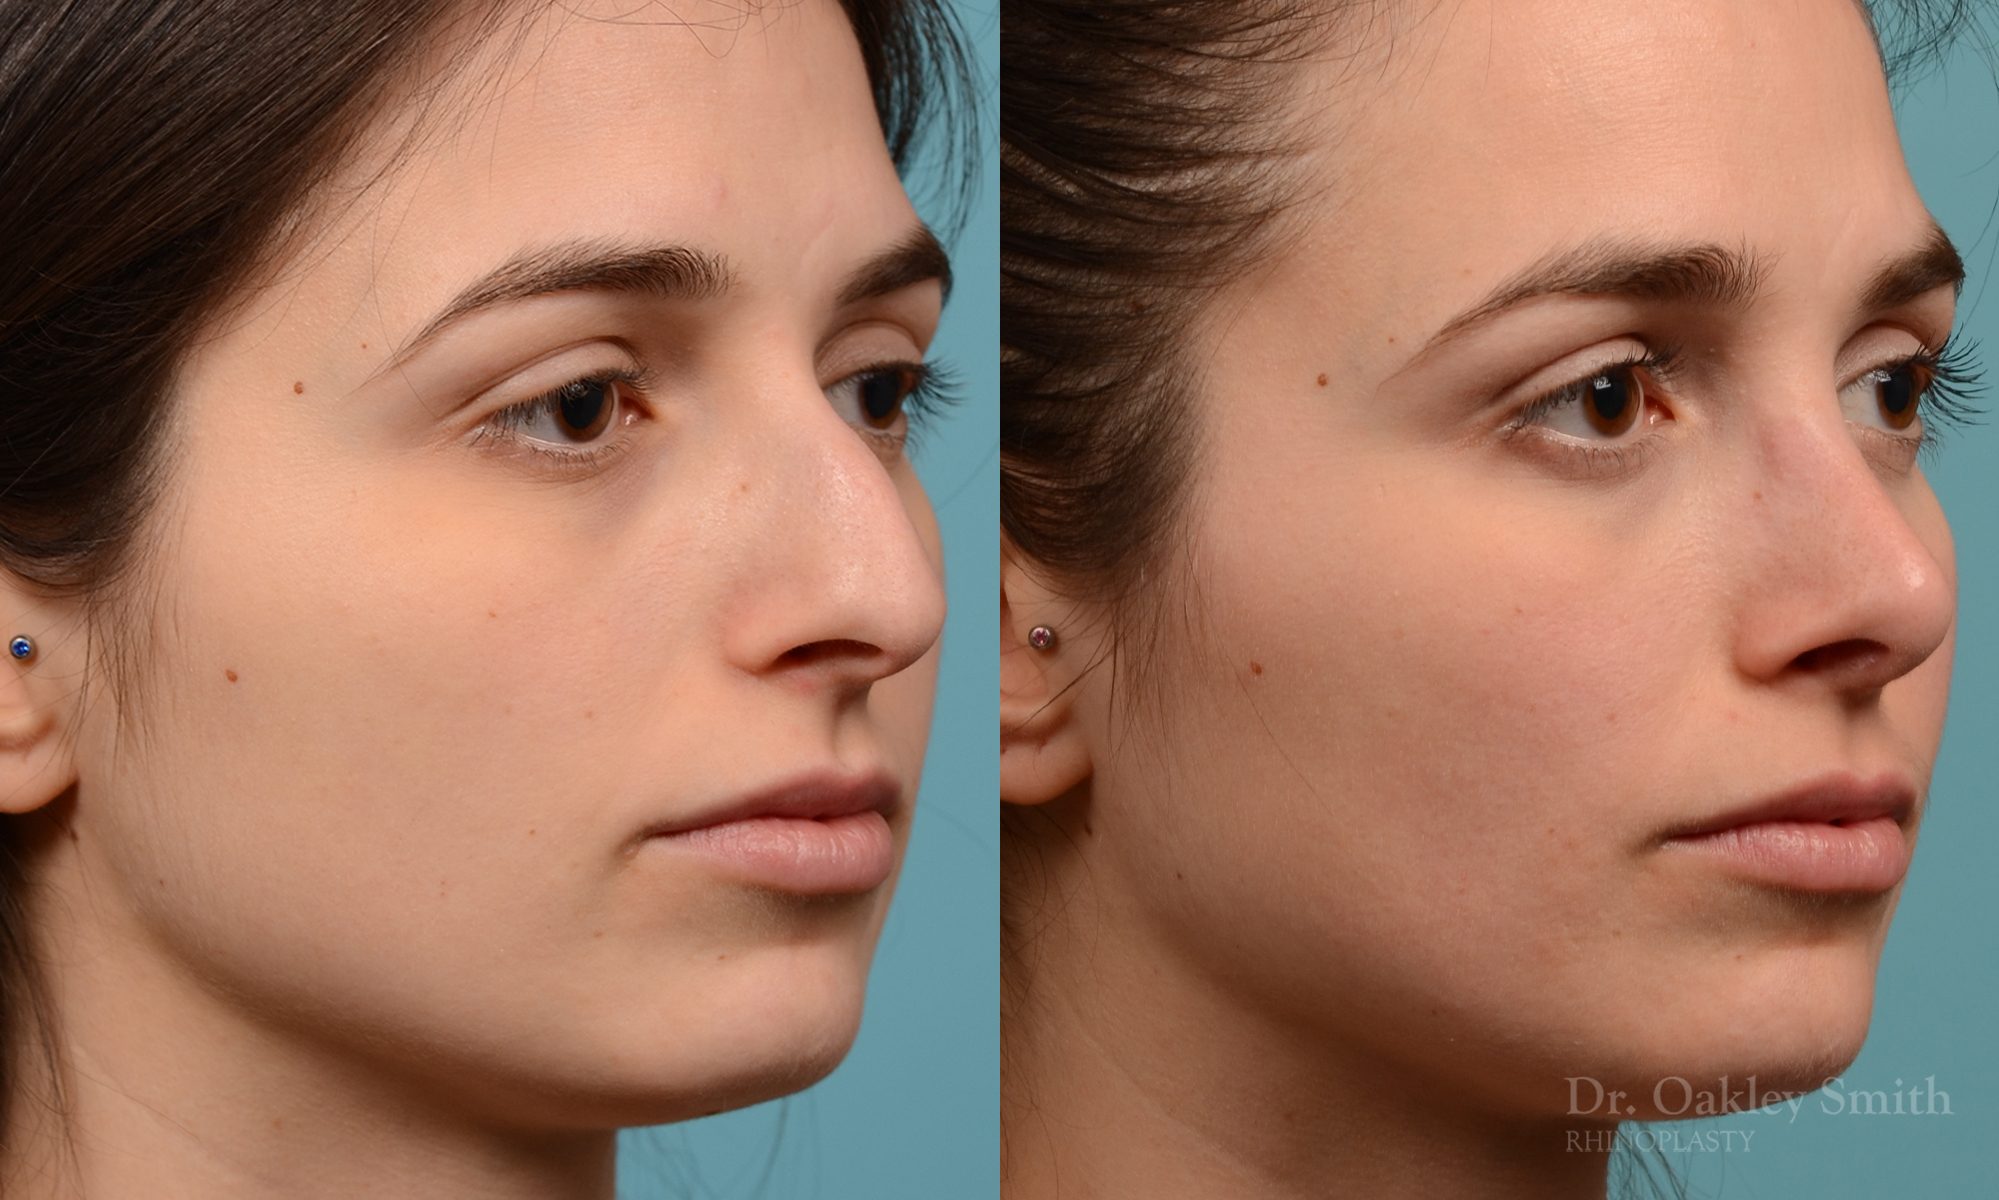 Severe rhinoplasty with hump reduction